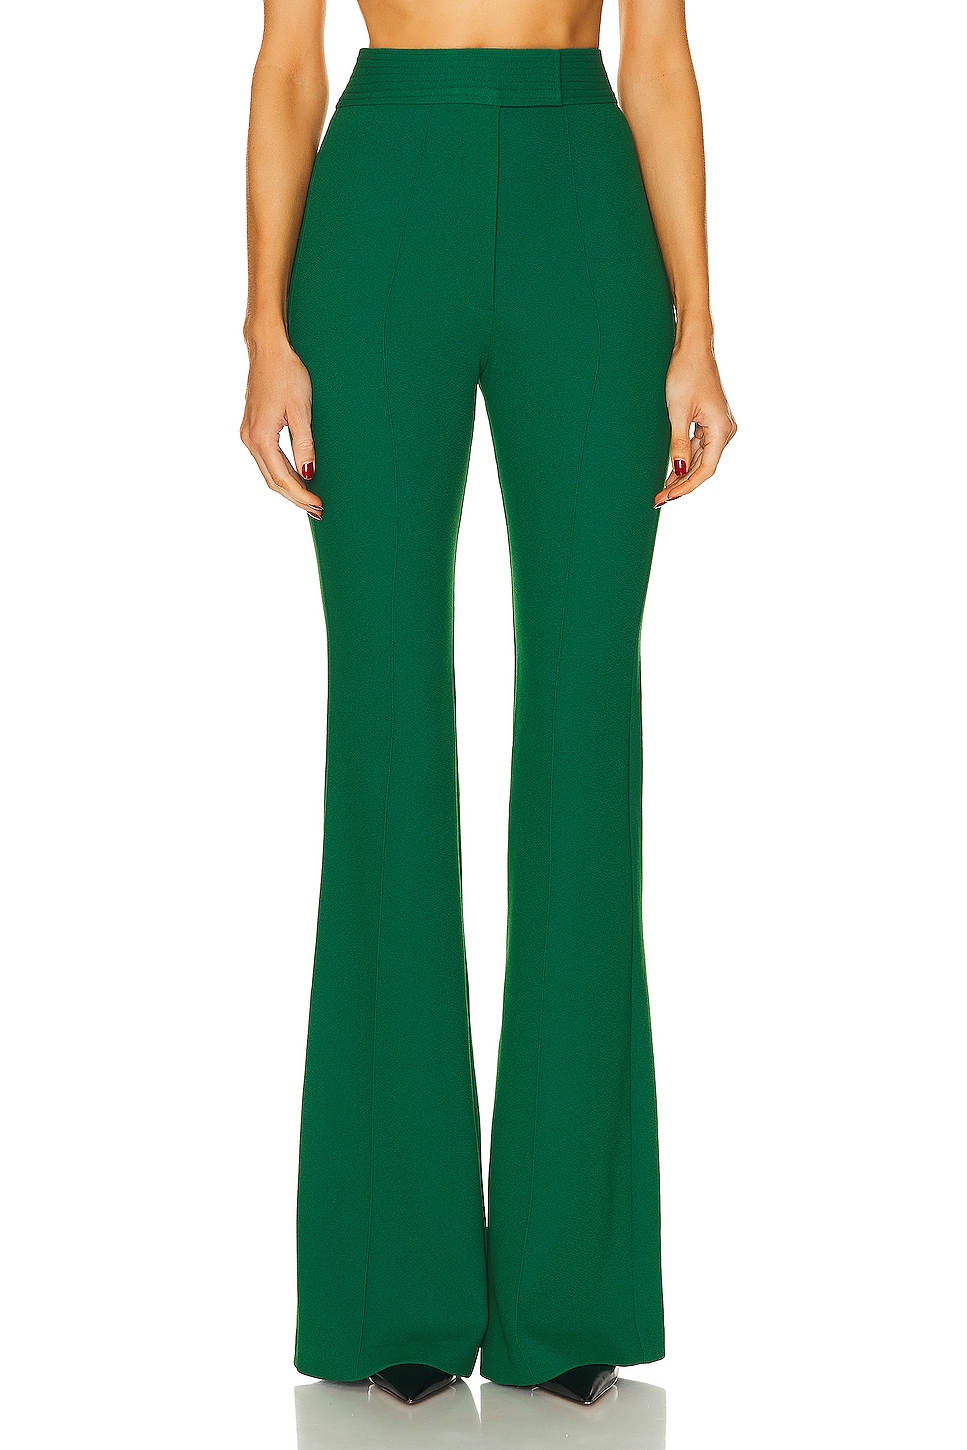 Image 1 of Alex Perry Flare Trouser in Emerald